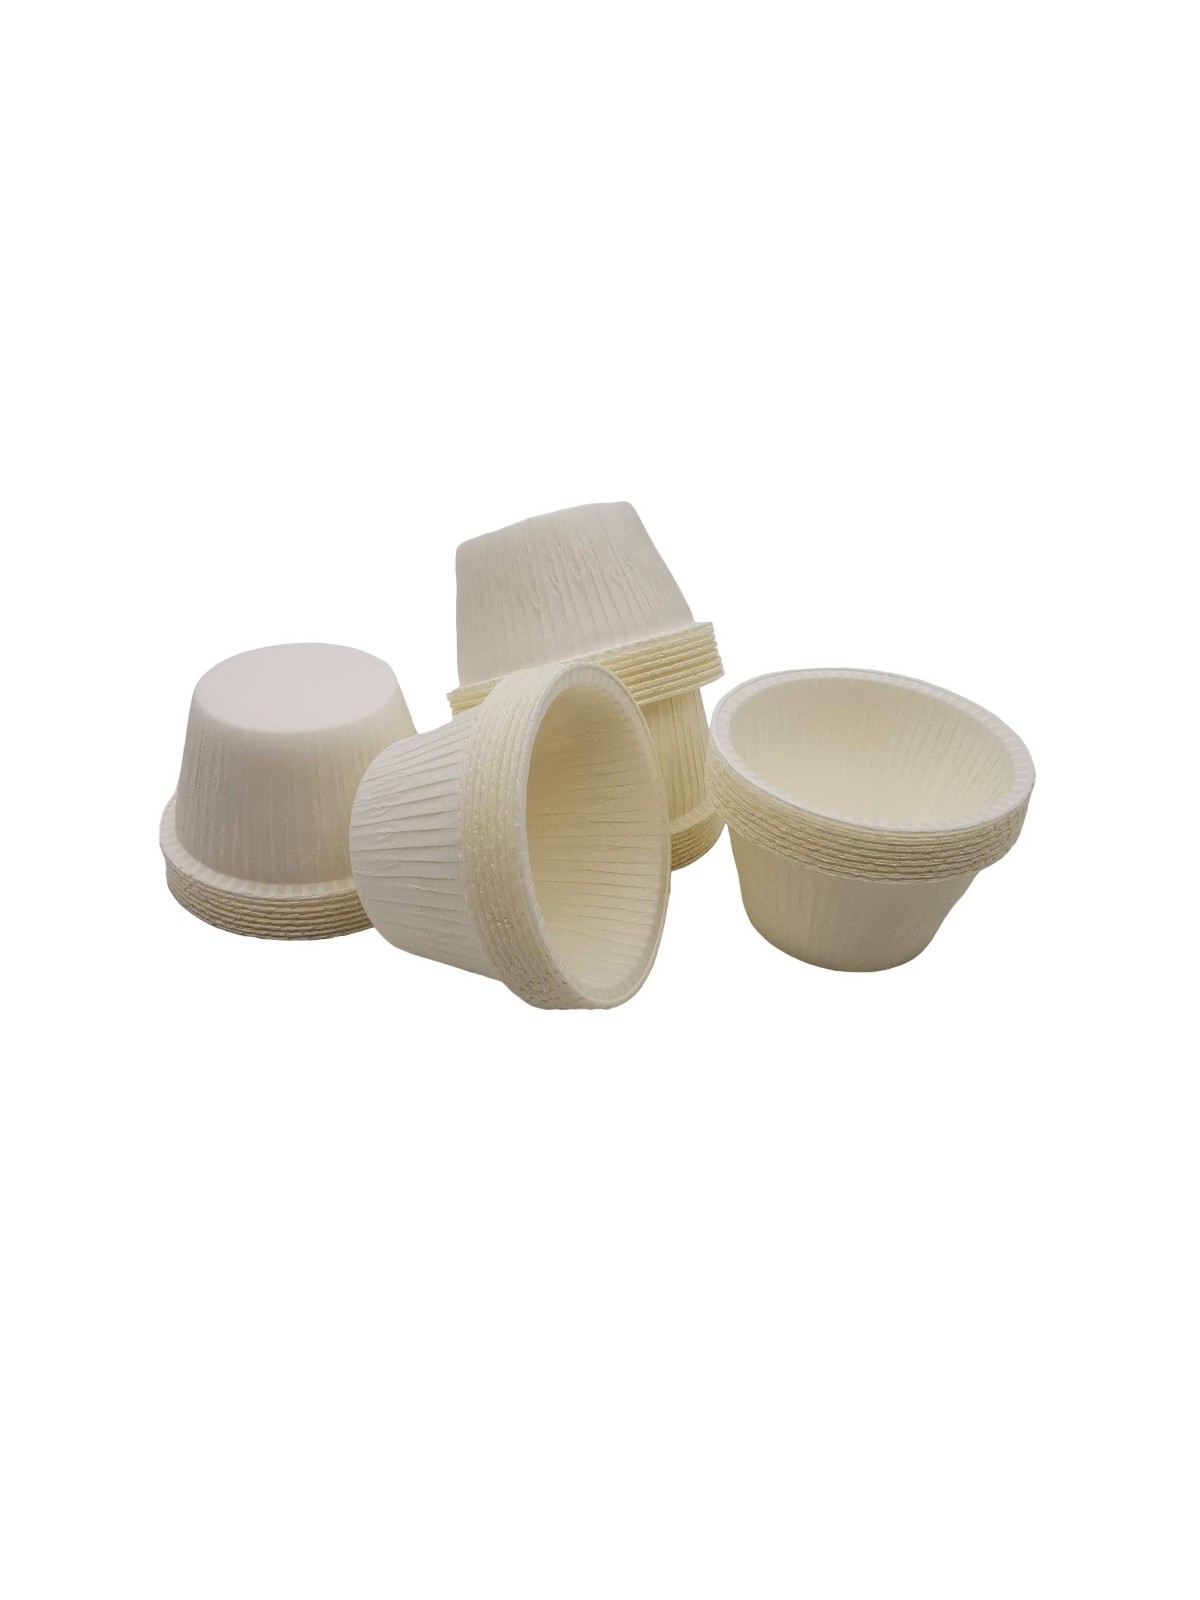 Baking cups - cream - self-supporting 5 x 4cm - 40 pcs